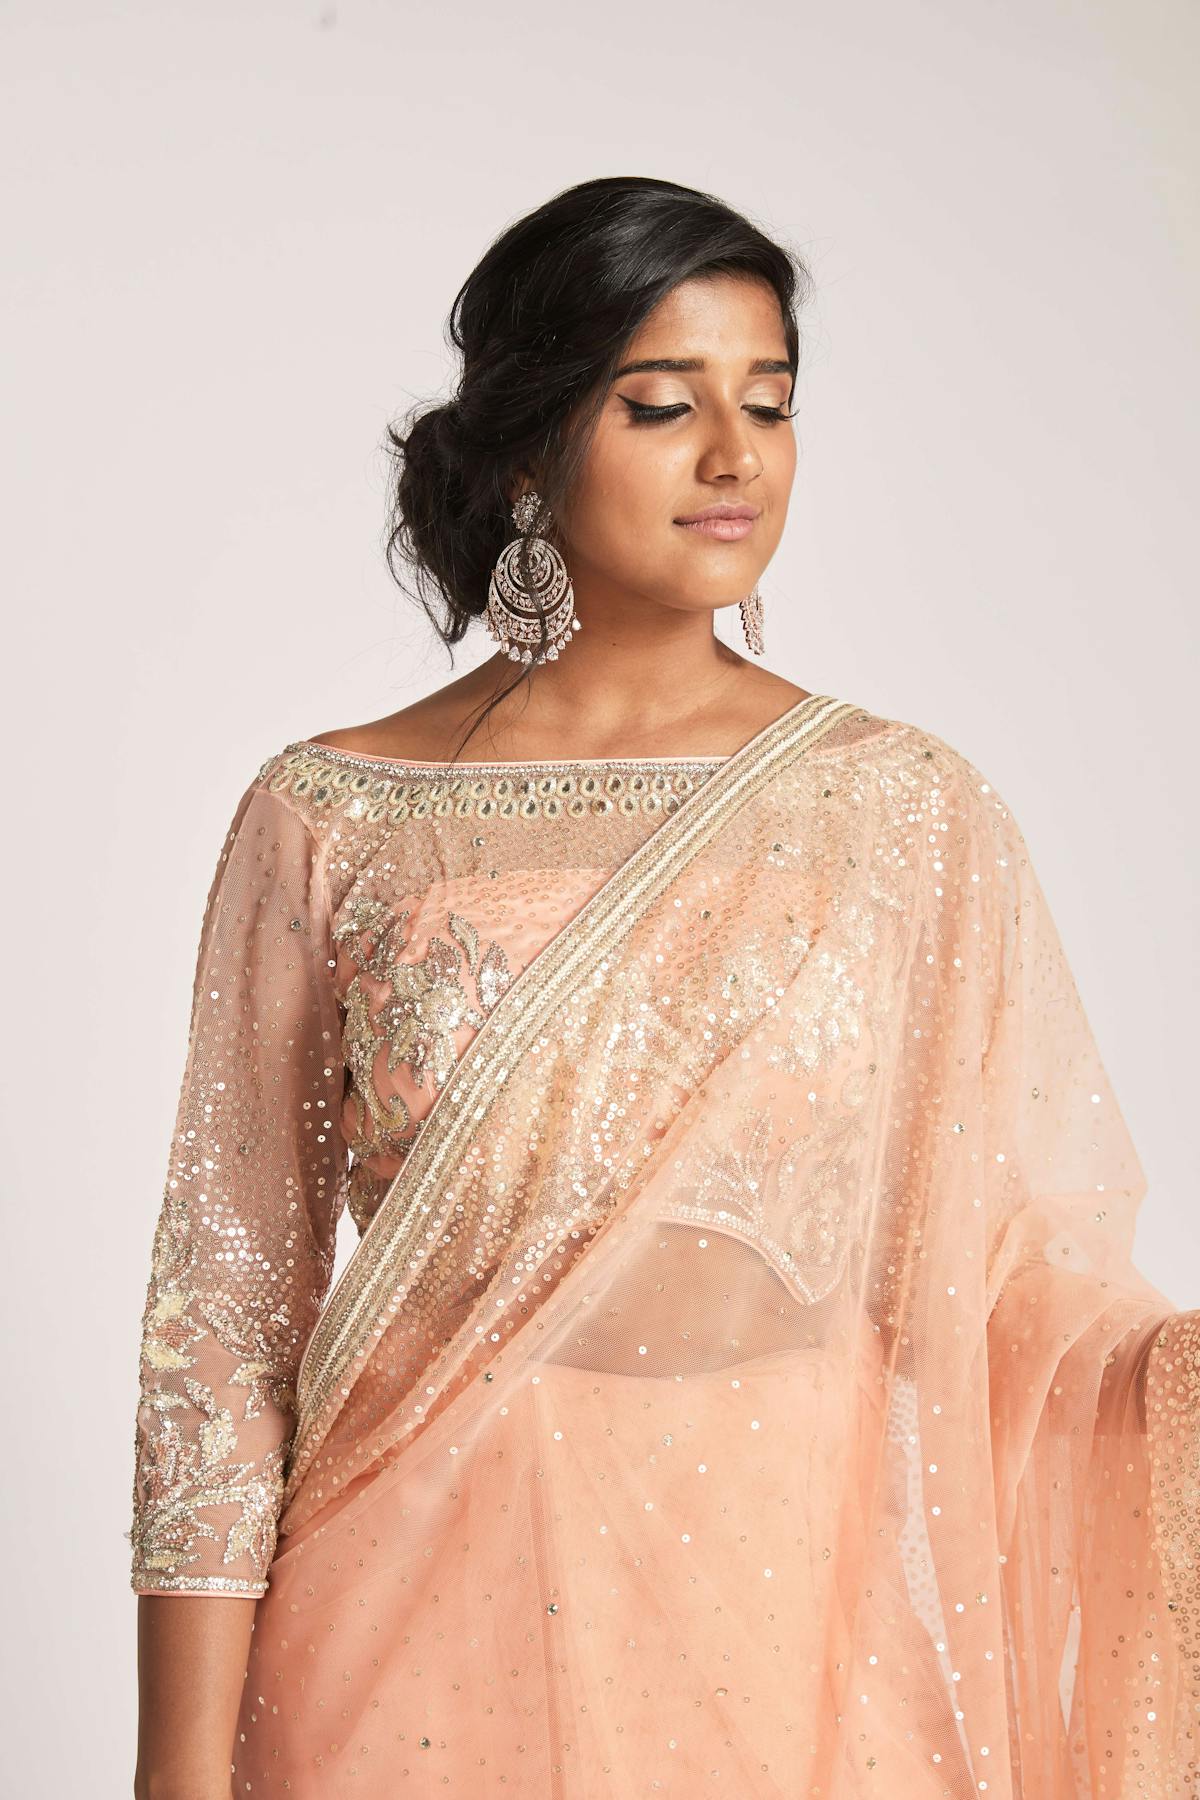 how to accessorize your outfit for a south asian wedding